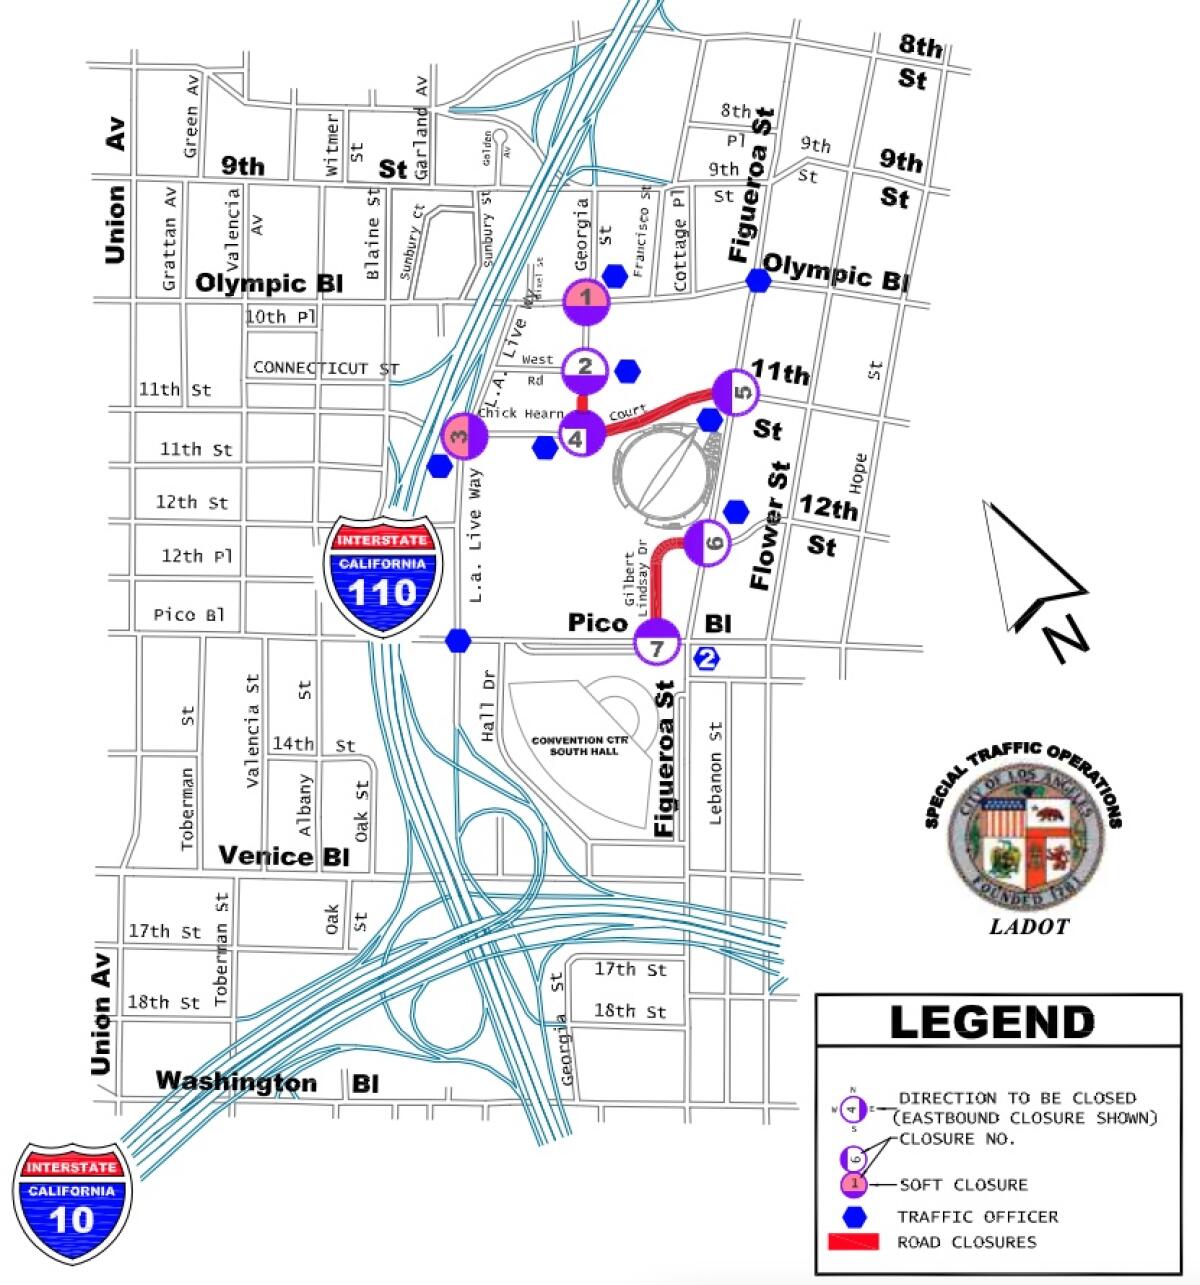 Map shows street closures in downtown L.A.